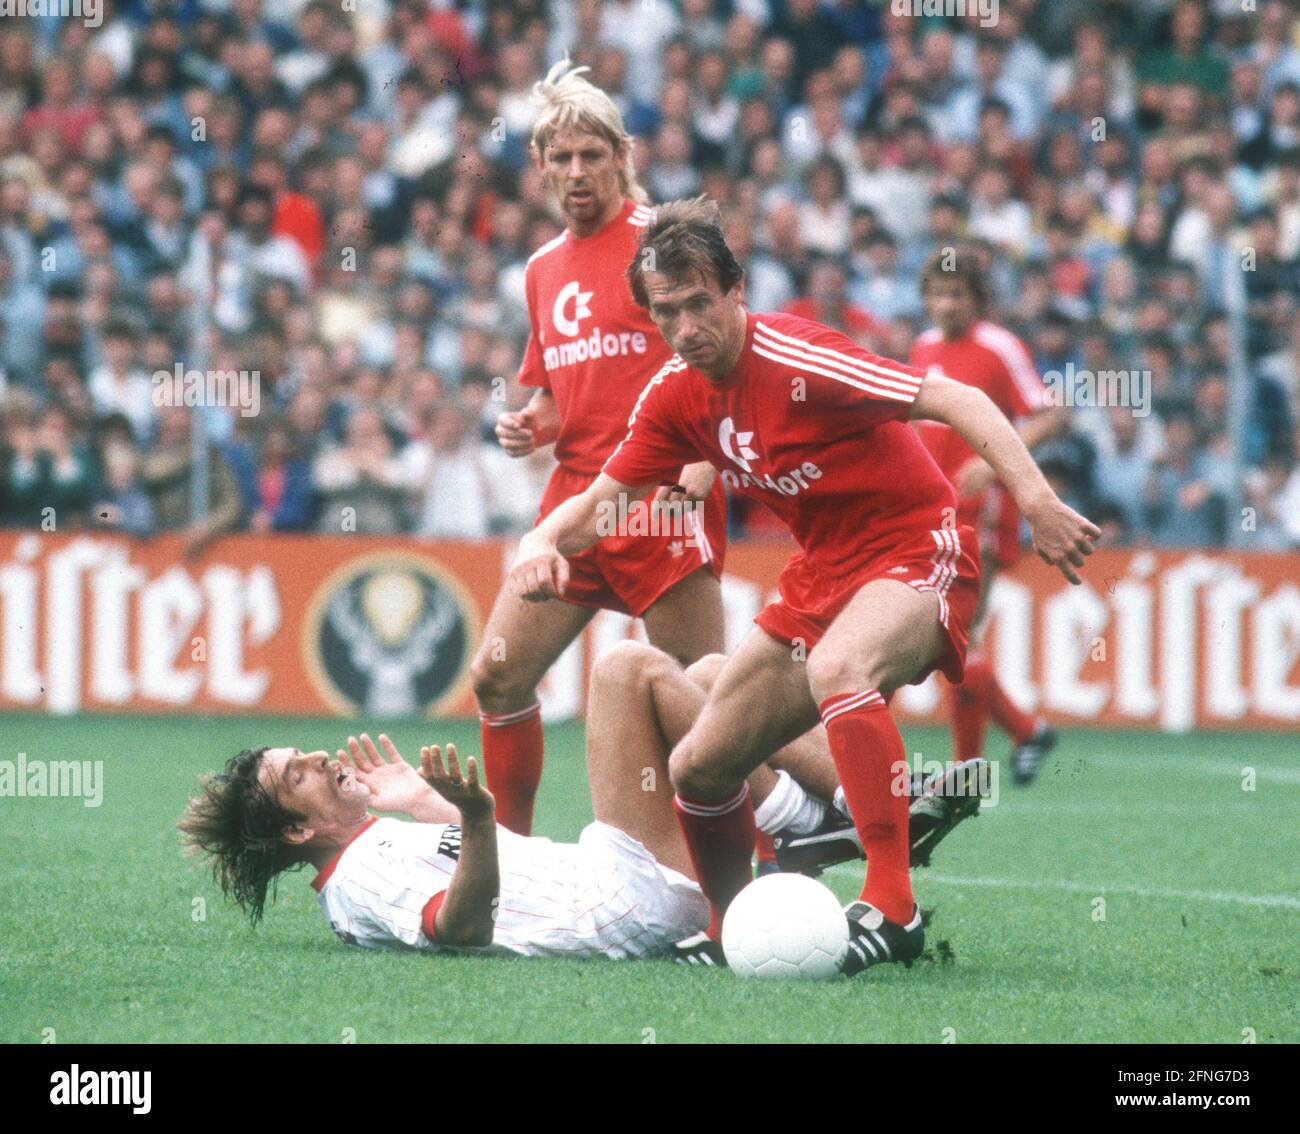 DFB Pokal 1987/88. 1st round: Rot-Weiß Essen - FC Bayern München 1:3/29.08.1987. Norbert Eder (FCB) action in front of Detlef Laibach (RWE/on the ground). Back: Norbert Nachtweih (FCB). [automated translation] Stock Photo